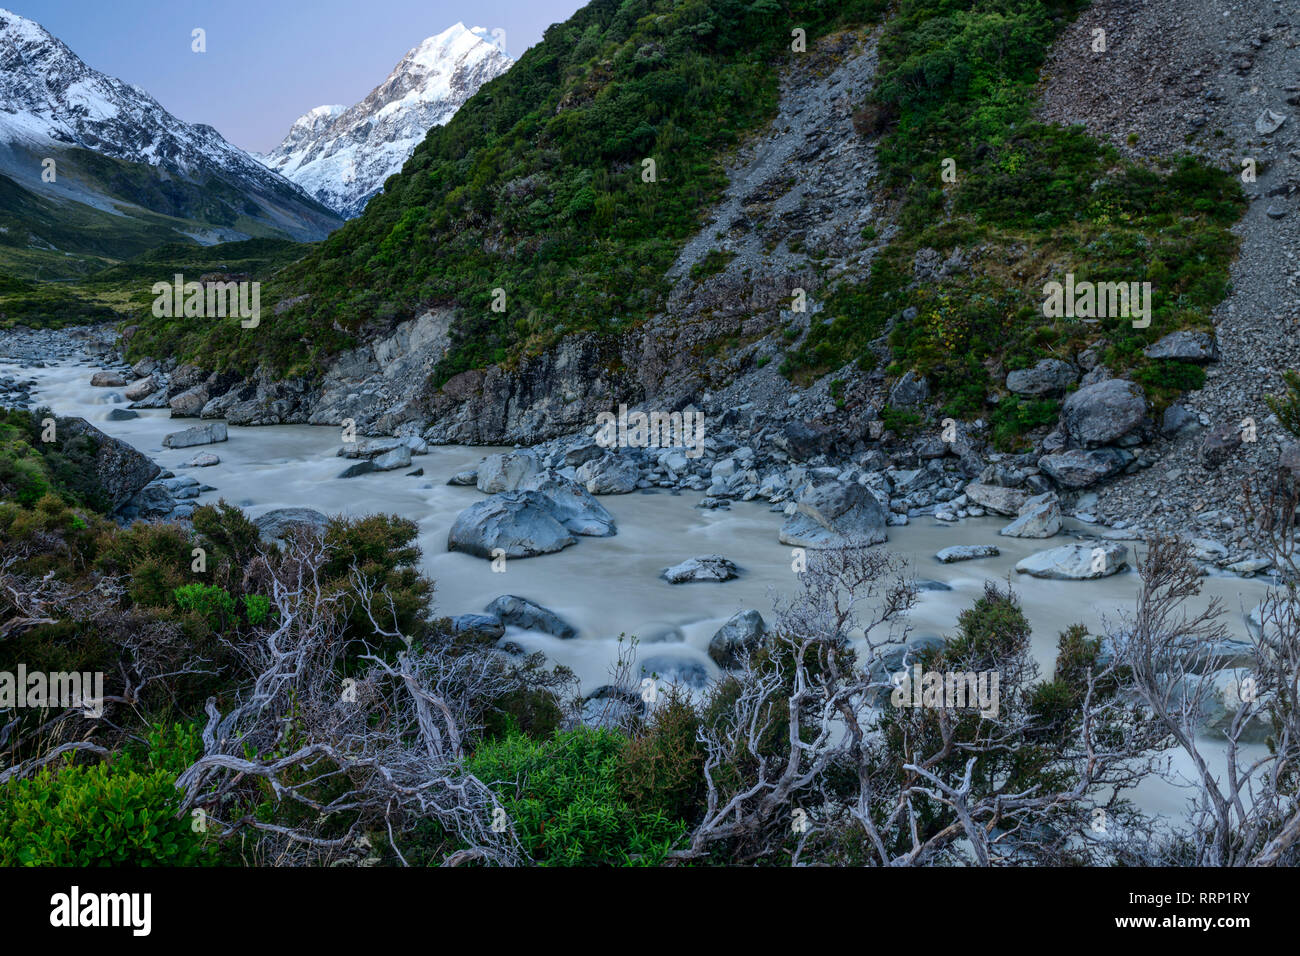 Oceania, New Zealand, Aotearoa, South Island, Mount Cook National Park, Hooker Creek with Mount Cook Stock Photo